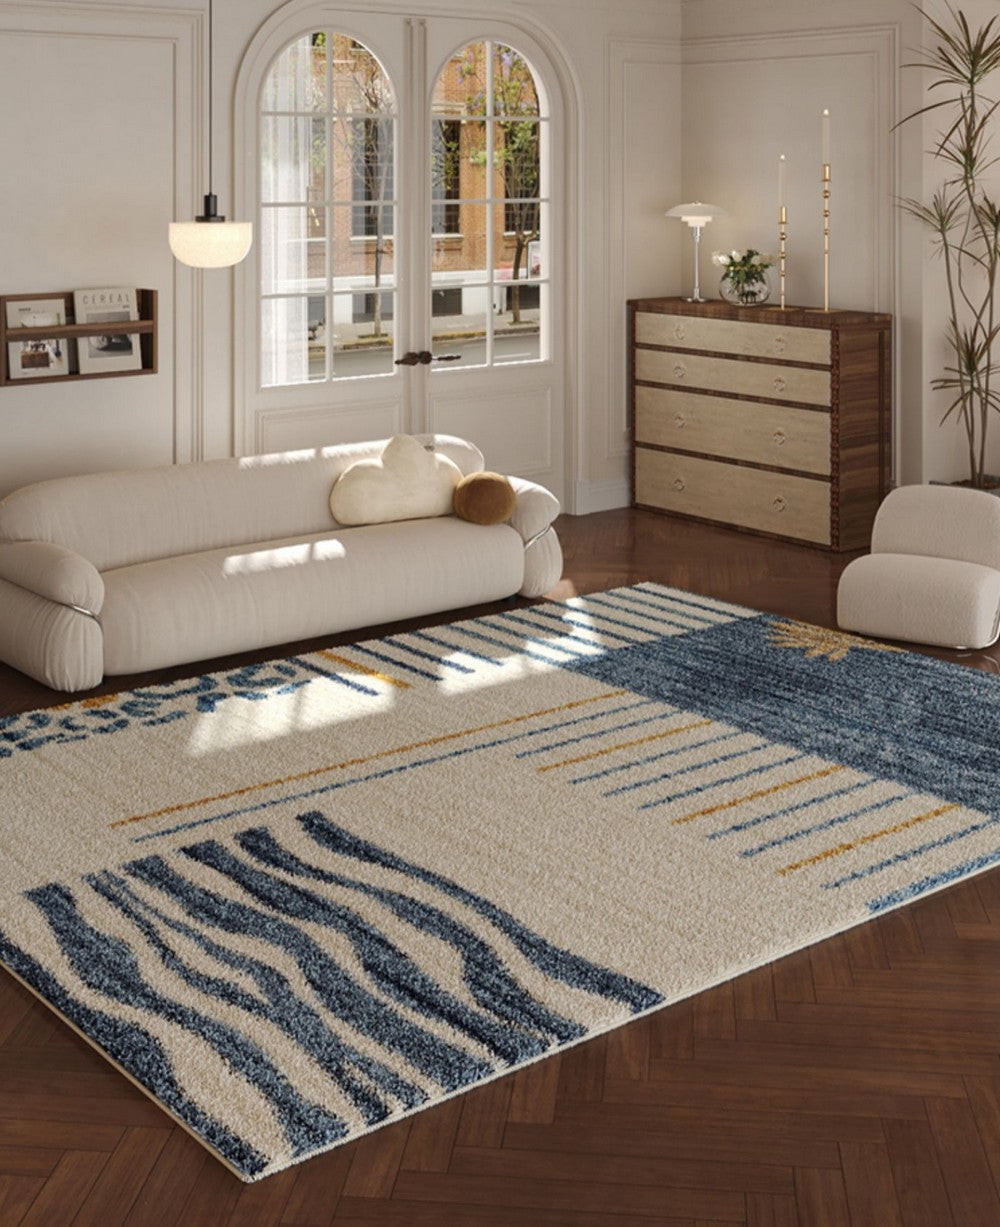 Abstract Contemporary Runner Rugs for Living Room, Modern Runner Rugs Next to Bed, Bathroom Runner Rugs, Kitchen Runner Rugs, Runner Rugs for Hallway-Silvia Home Craft